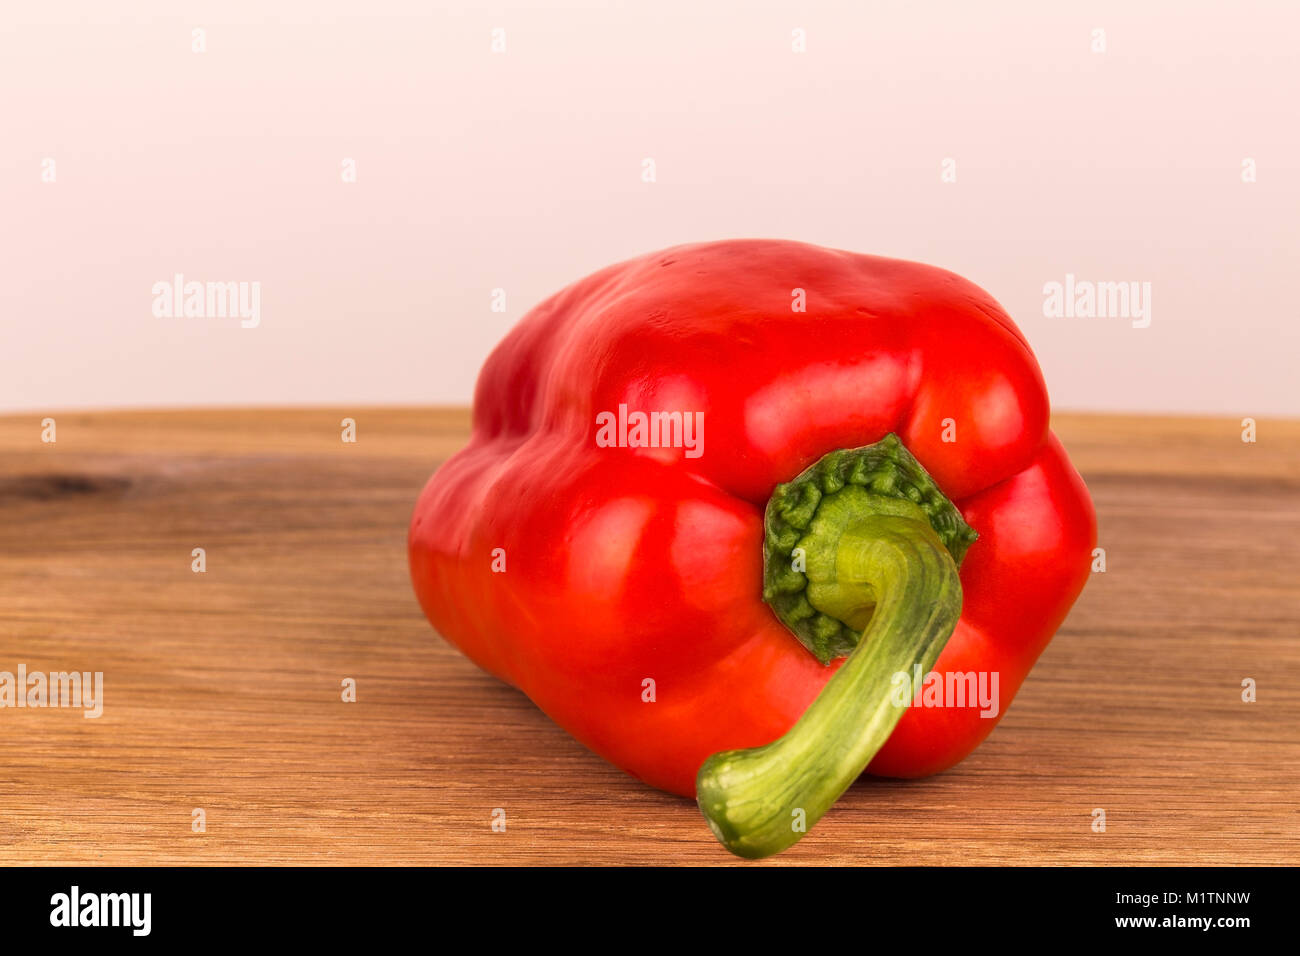 Red pepper, on a oak table taken as a close up with shallow depth of field. Stock Photo